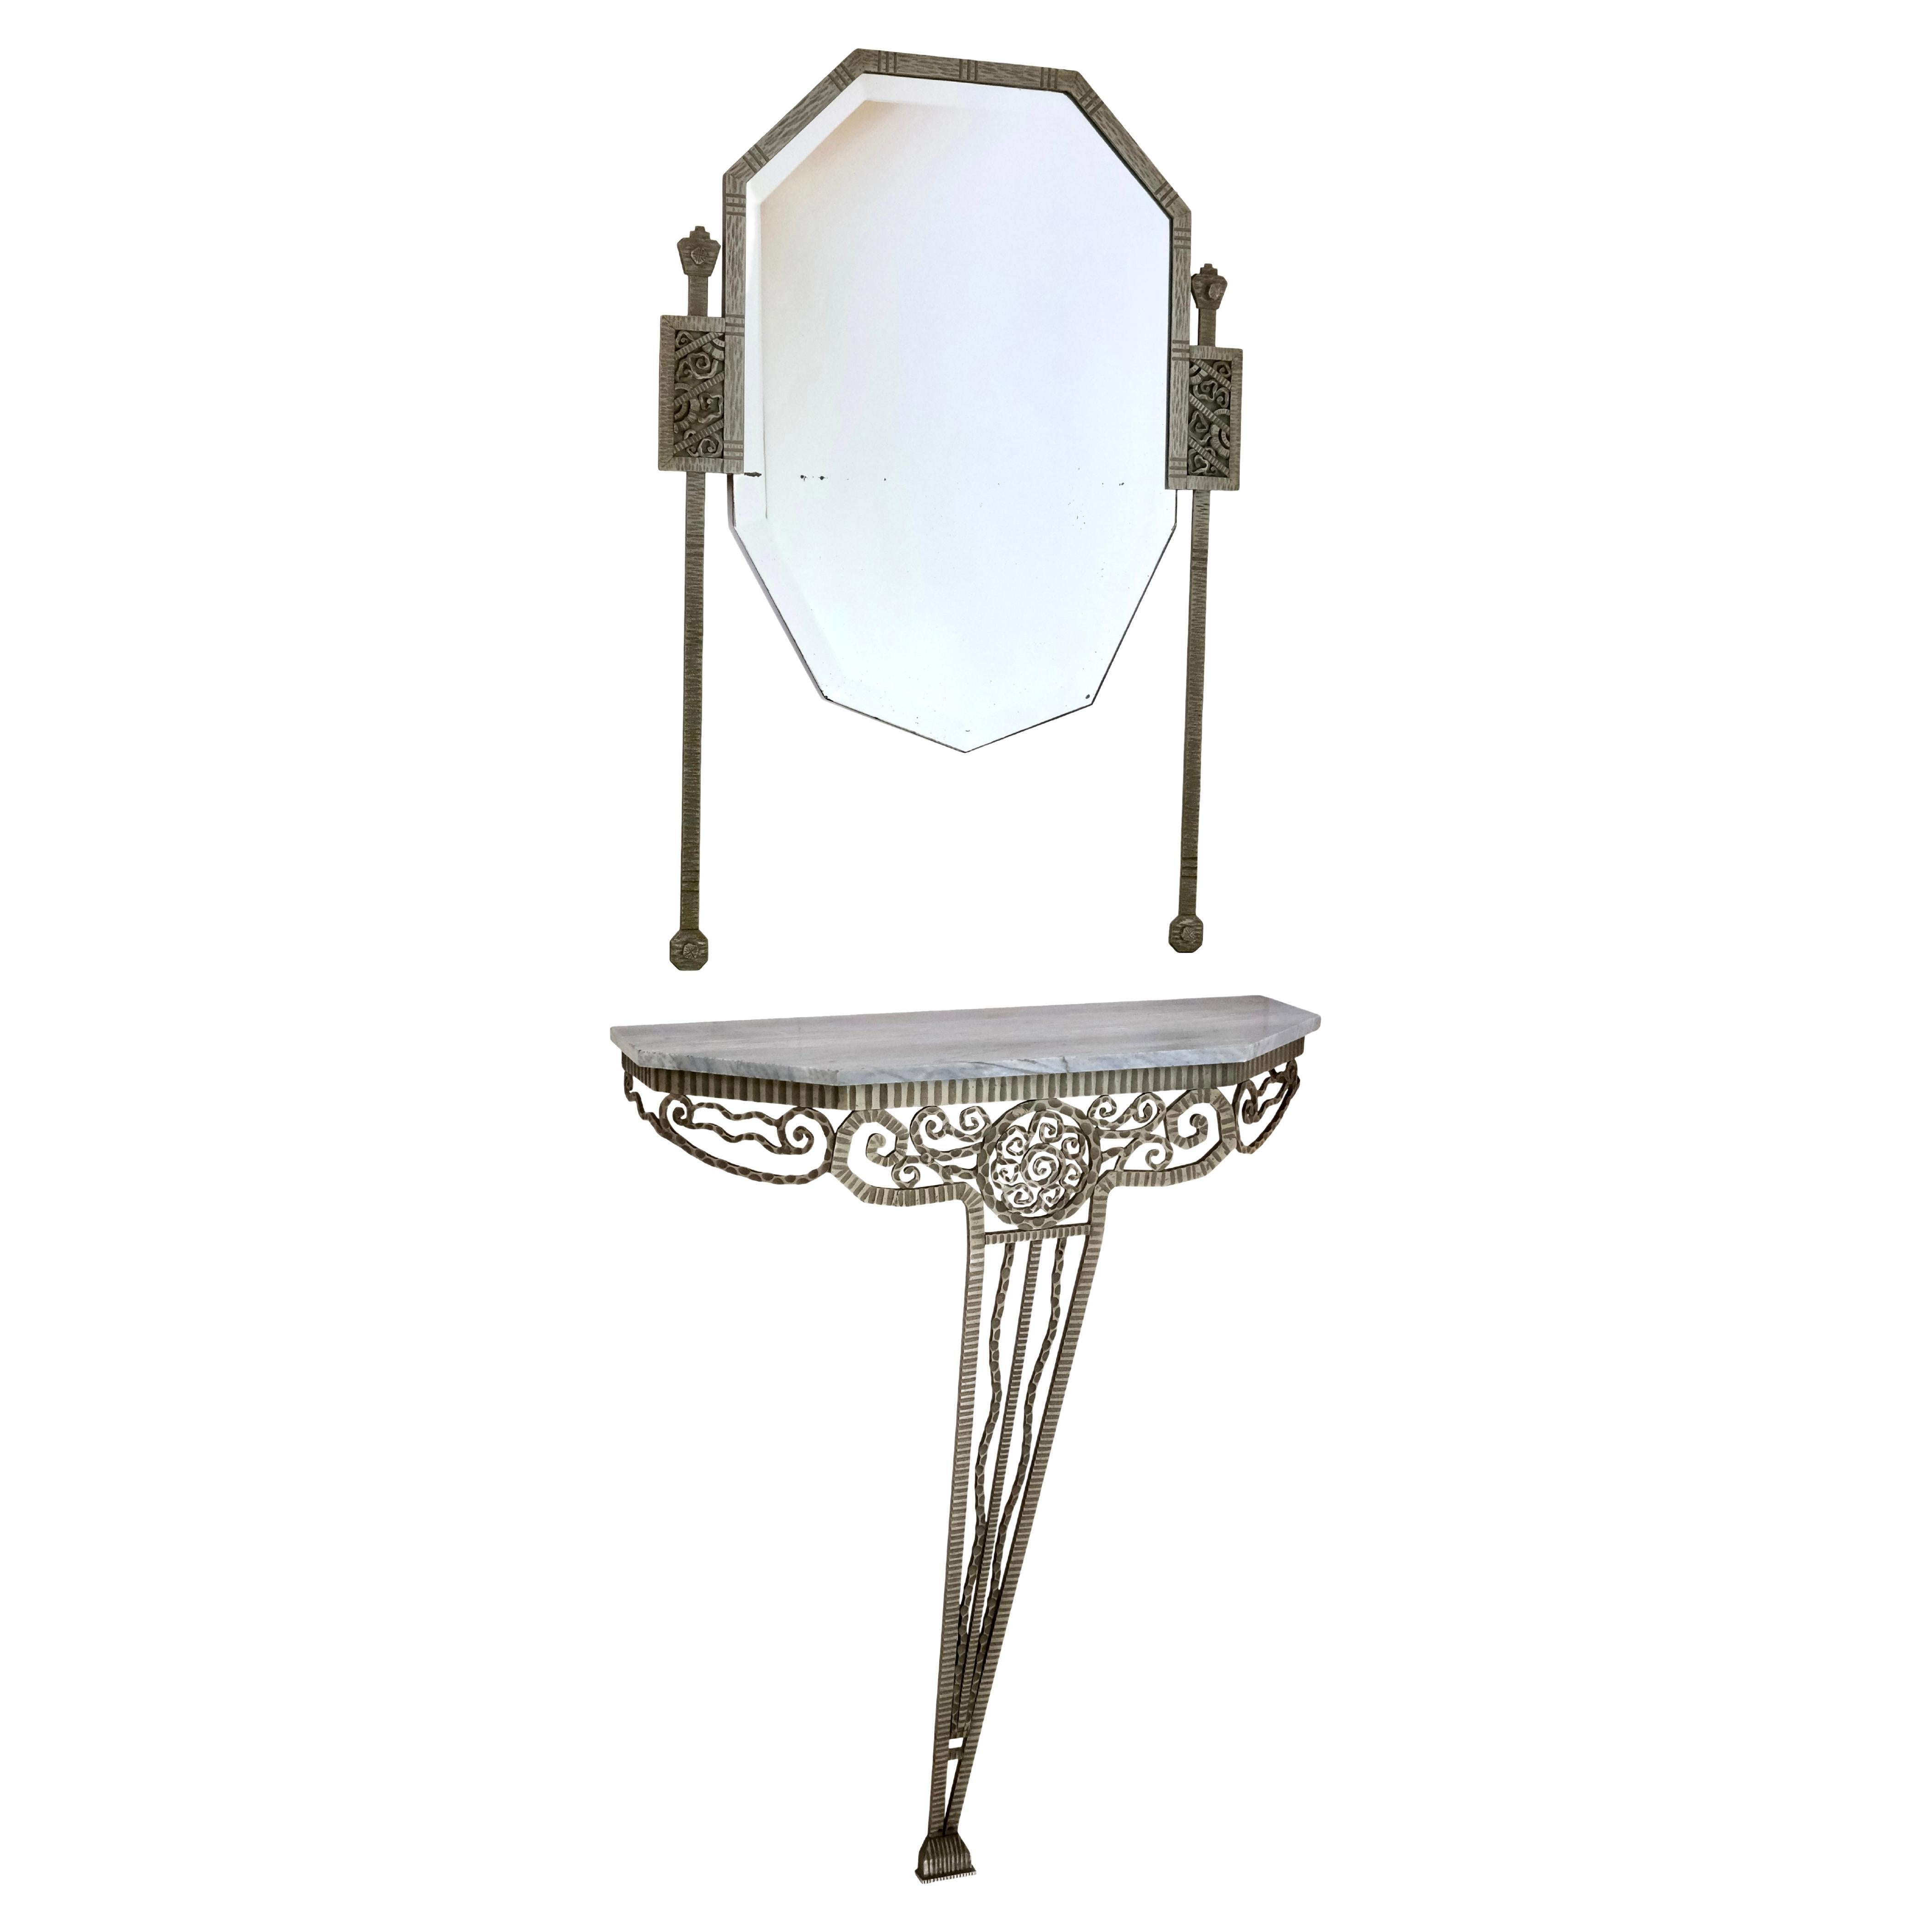 Wrought Iron French 1920's Art Deco Console Table with White Marble and Mirror